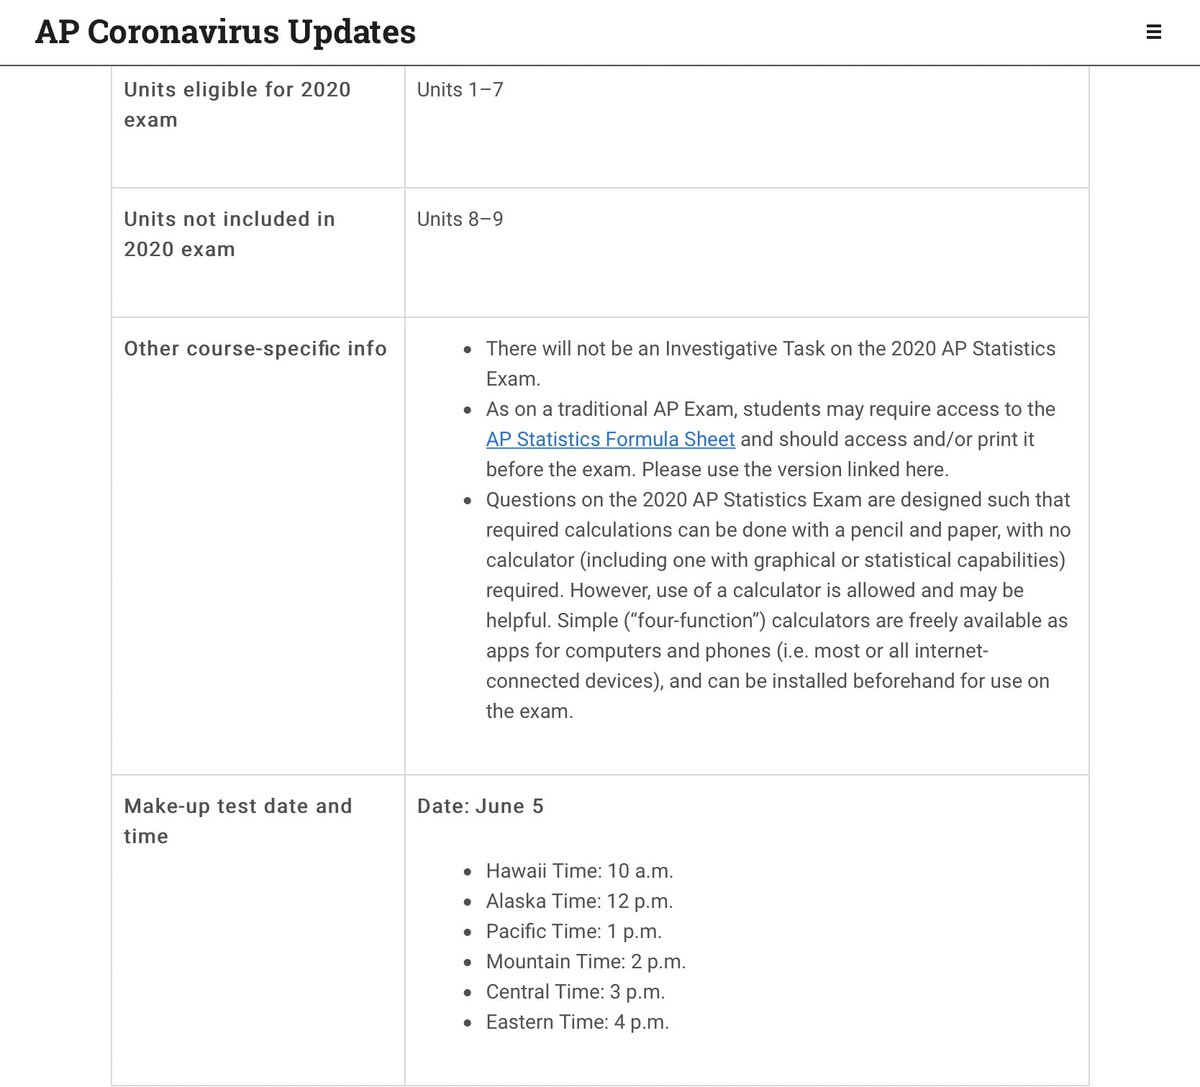  #APStatistics information for the 2020  #AP exam on May 22, 2020 at 2:00pm EDT. Click the link to see the entire page; screen shots are in this thread.  @josemartimast  @MDCPS  @MDCPSNorth  @MDCPSMath  @MDCPSSTEAM  #mast1920 3/3 https://apcoronavirusupdates.collegeboard.org/educators/taking-the-exams/ap-exam-schedule